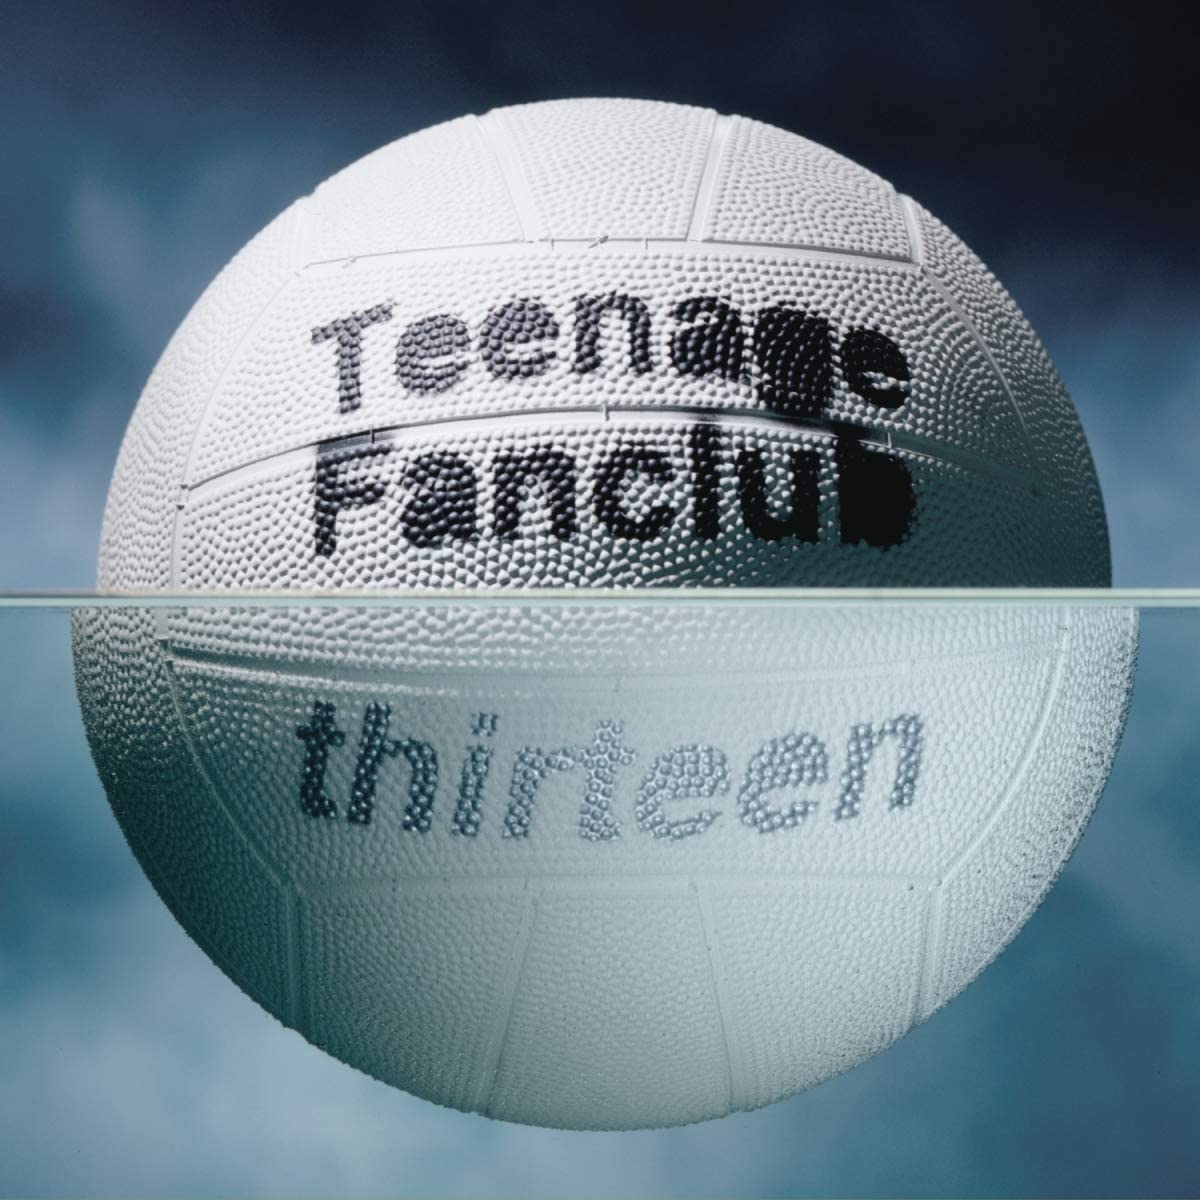 On release on Vinyl, Thirteen reached #14 in the UK Charts, their highest charting album at the time. This was the band's supposed 'difficult' album following on from the global success of Bandwagonesque